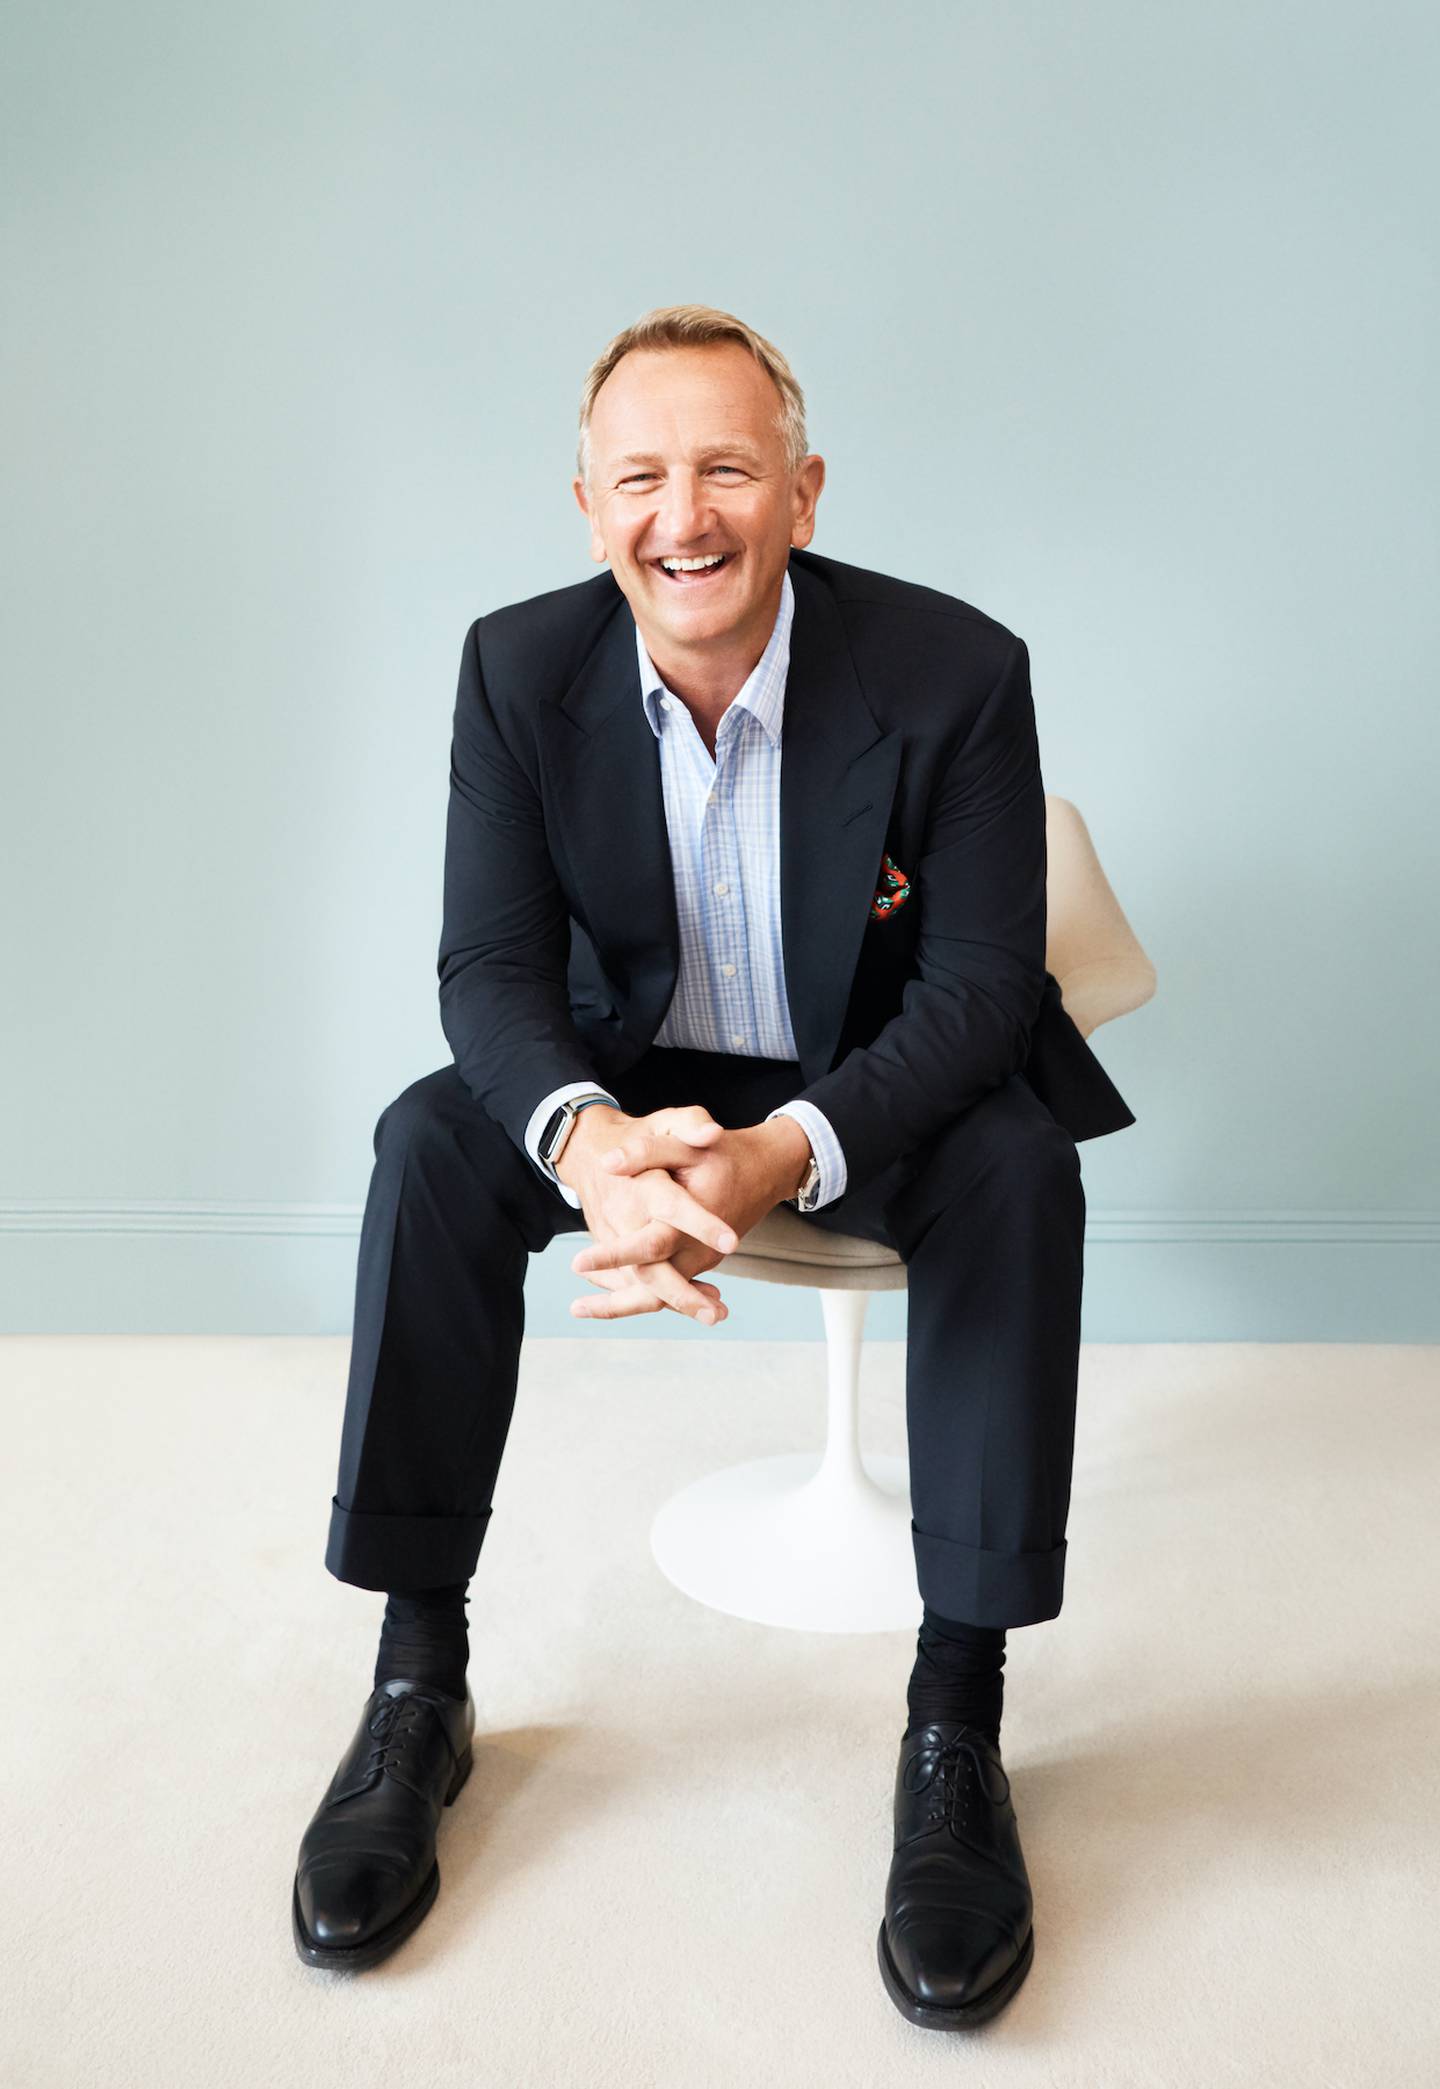 Nick Beighton joined Matchesfashion as CEO in August 2022.